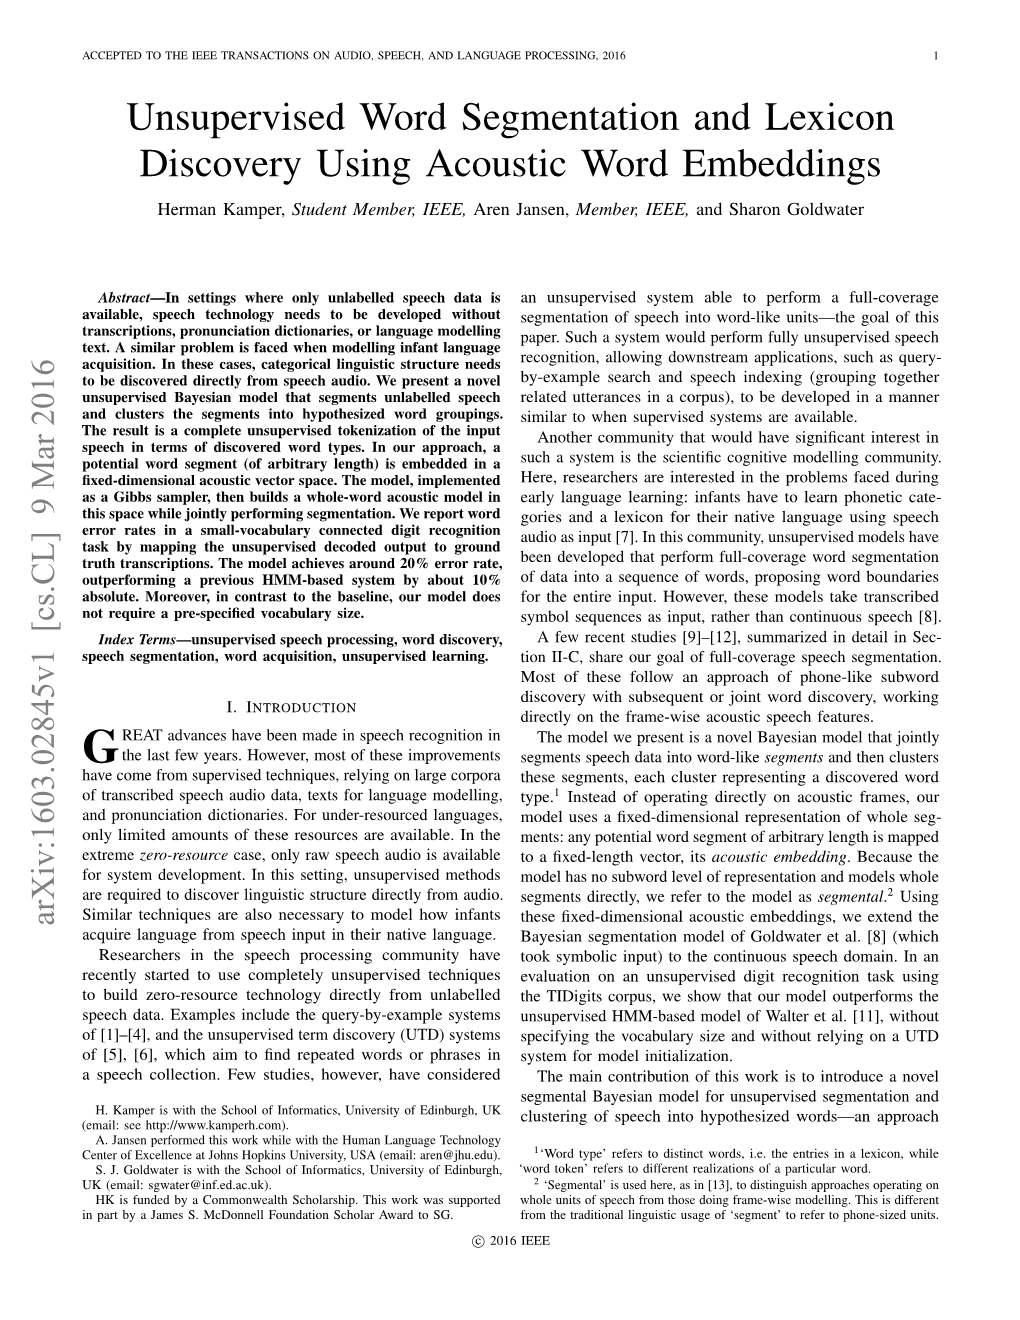 Unsupervised Word Segmentation and Lexicon Discovery Using